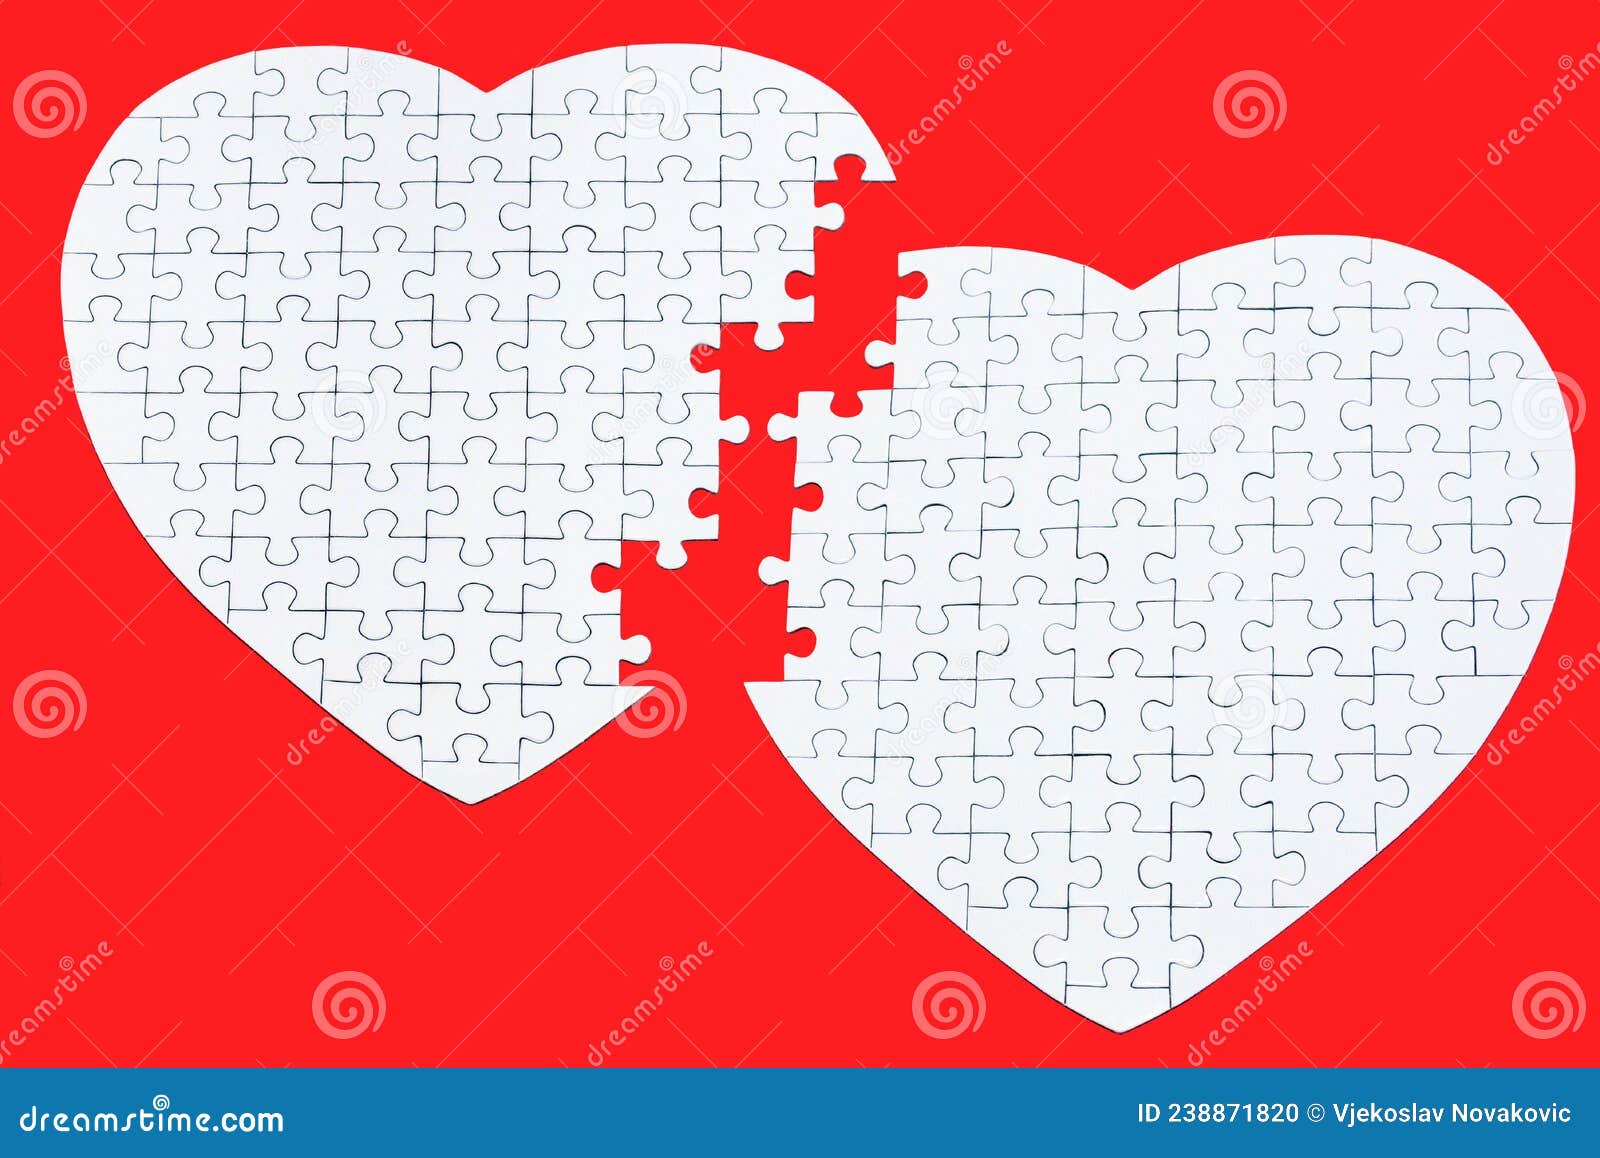 two hearts of white puzzles, incomplete transition from one heart to another, love, together